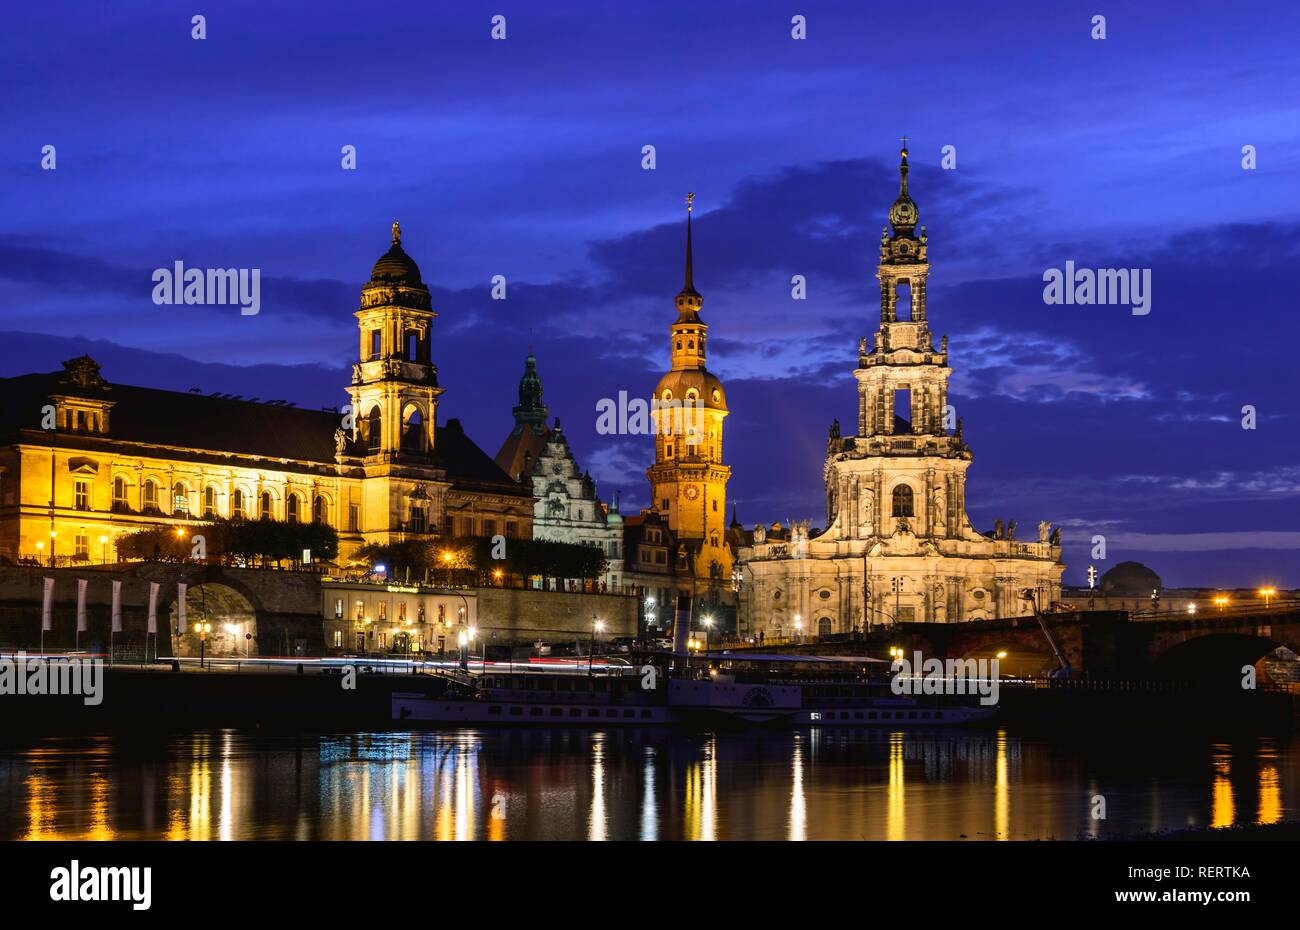 Old town at night, terrace bank, court church, residential palace and Elbe with water reflection, Dresden, Saxony, Germany Stock Photo